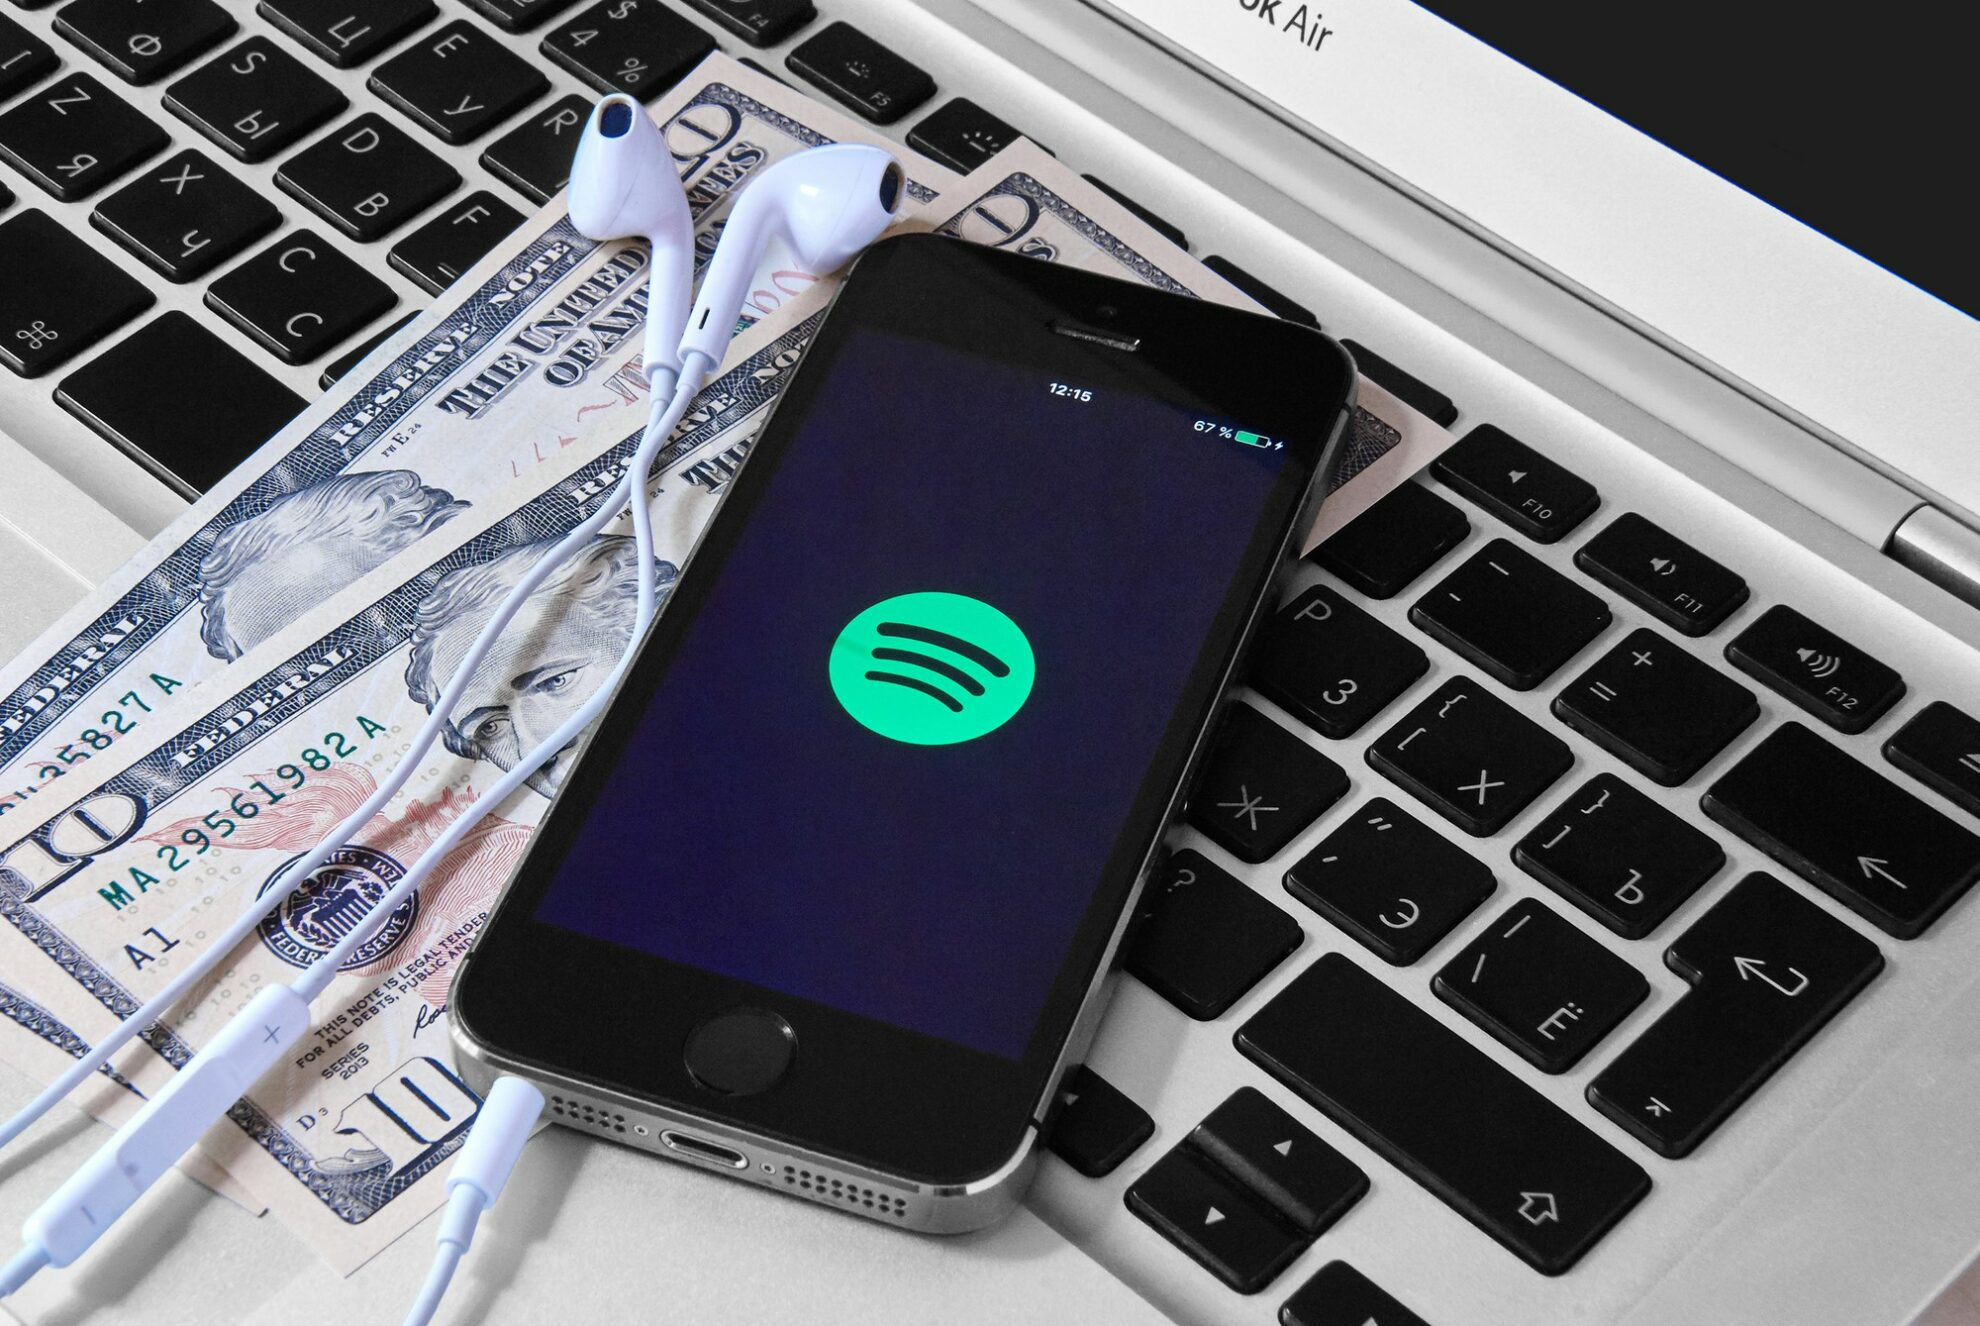 Mobile device displaying the Spotify logo on a laptop with money